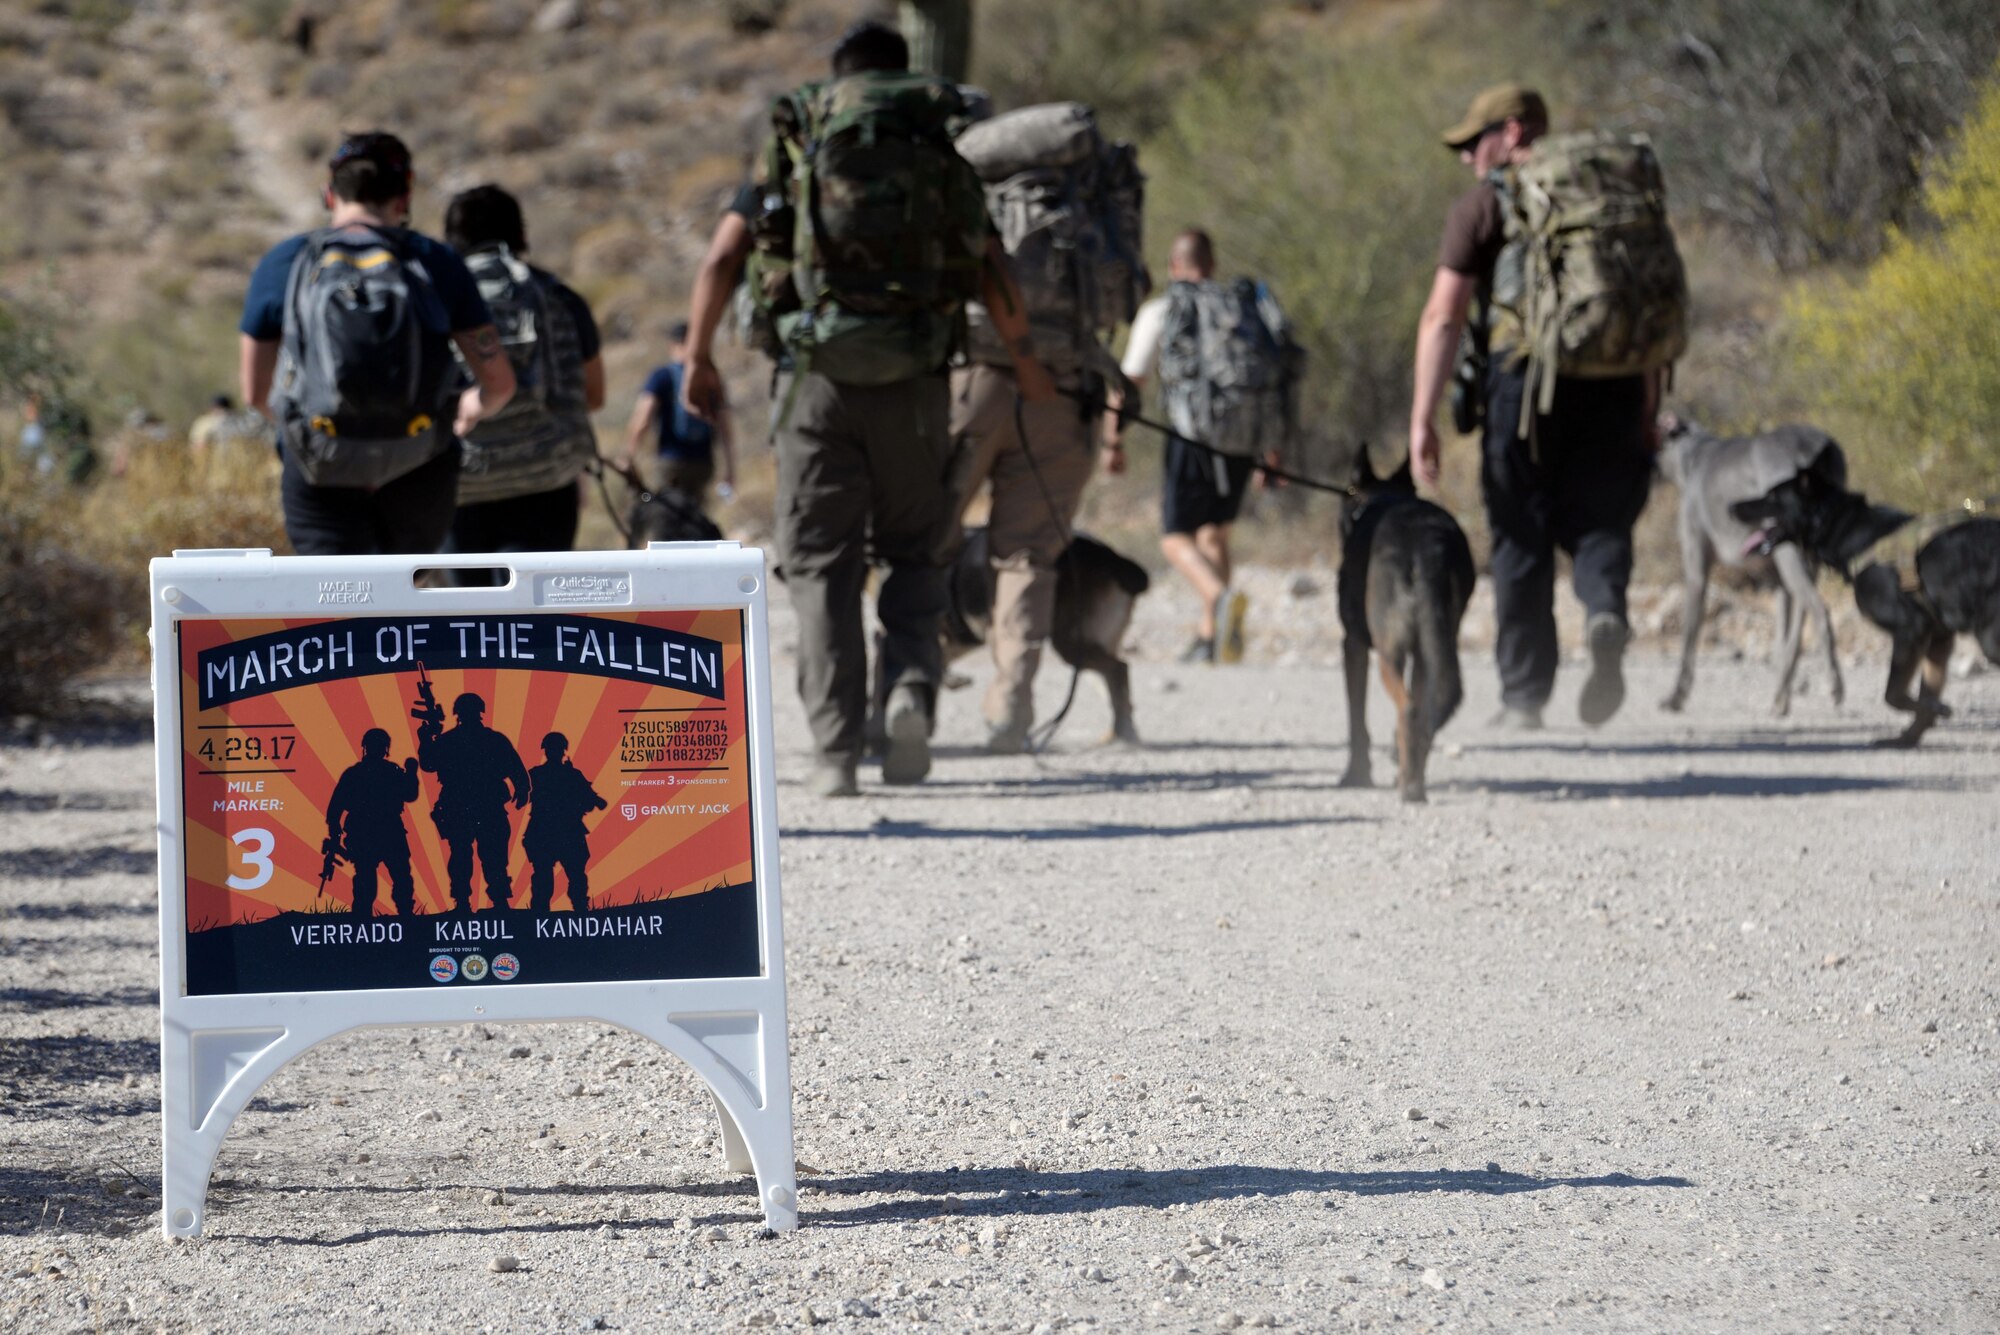 March of the Fallen pass mile three marker during the ruck march through White Tank Mountain Regional Park April 29, 2017 in Waddell, Ariz.  Proceeds from the even benefit the Wounded Warrior Project and Luke Airmen’s Fund. (U.S. Air Force photo by Devante Williams)